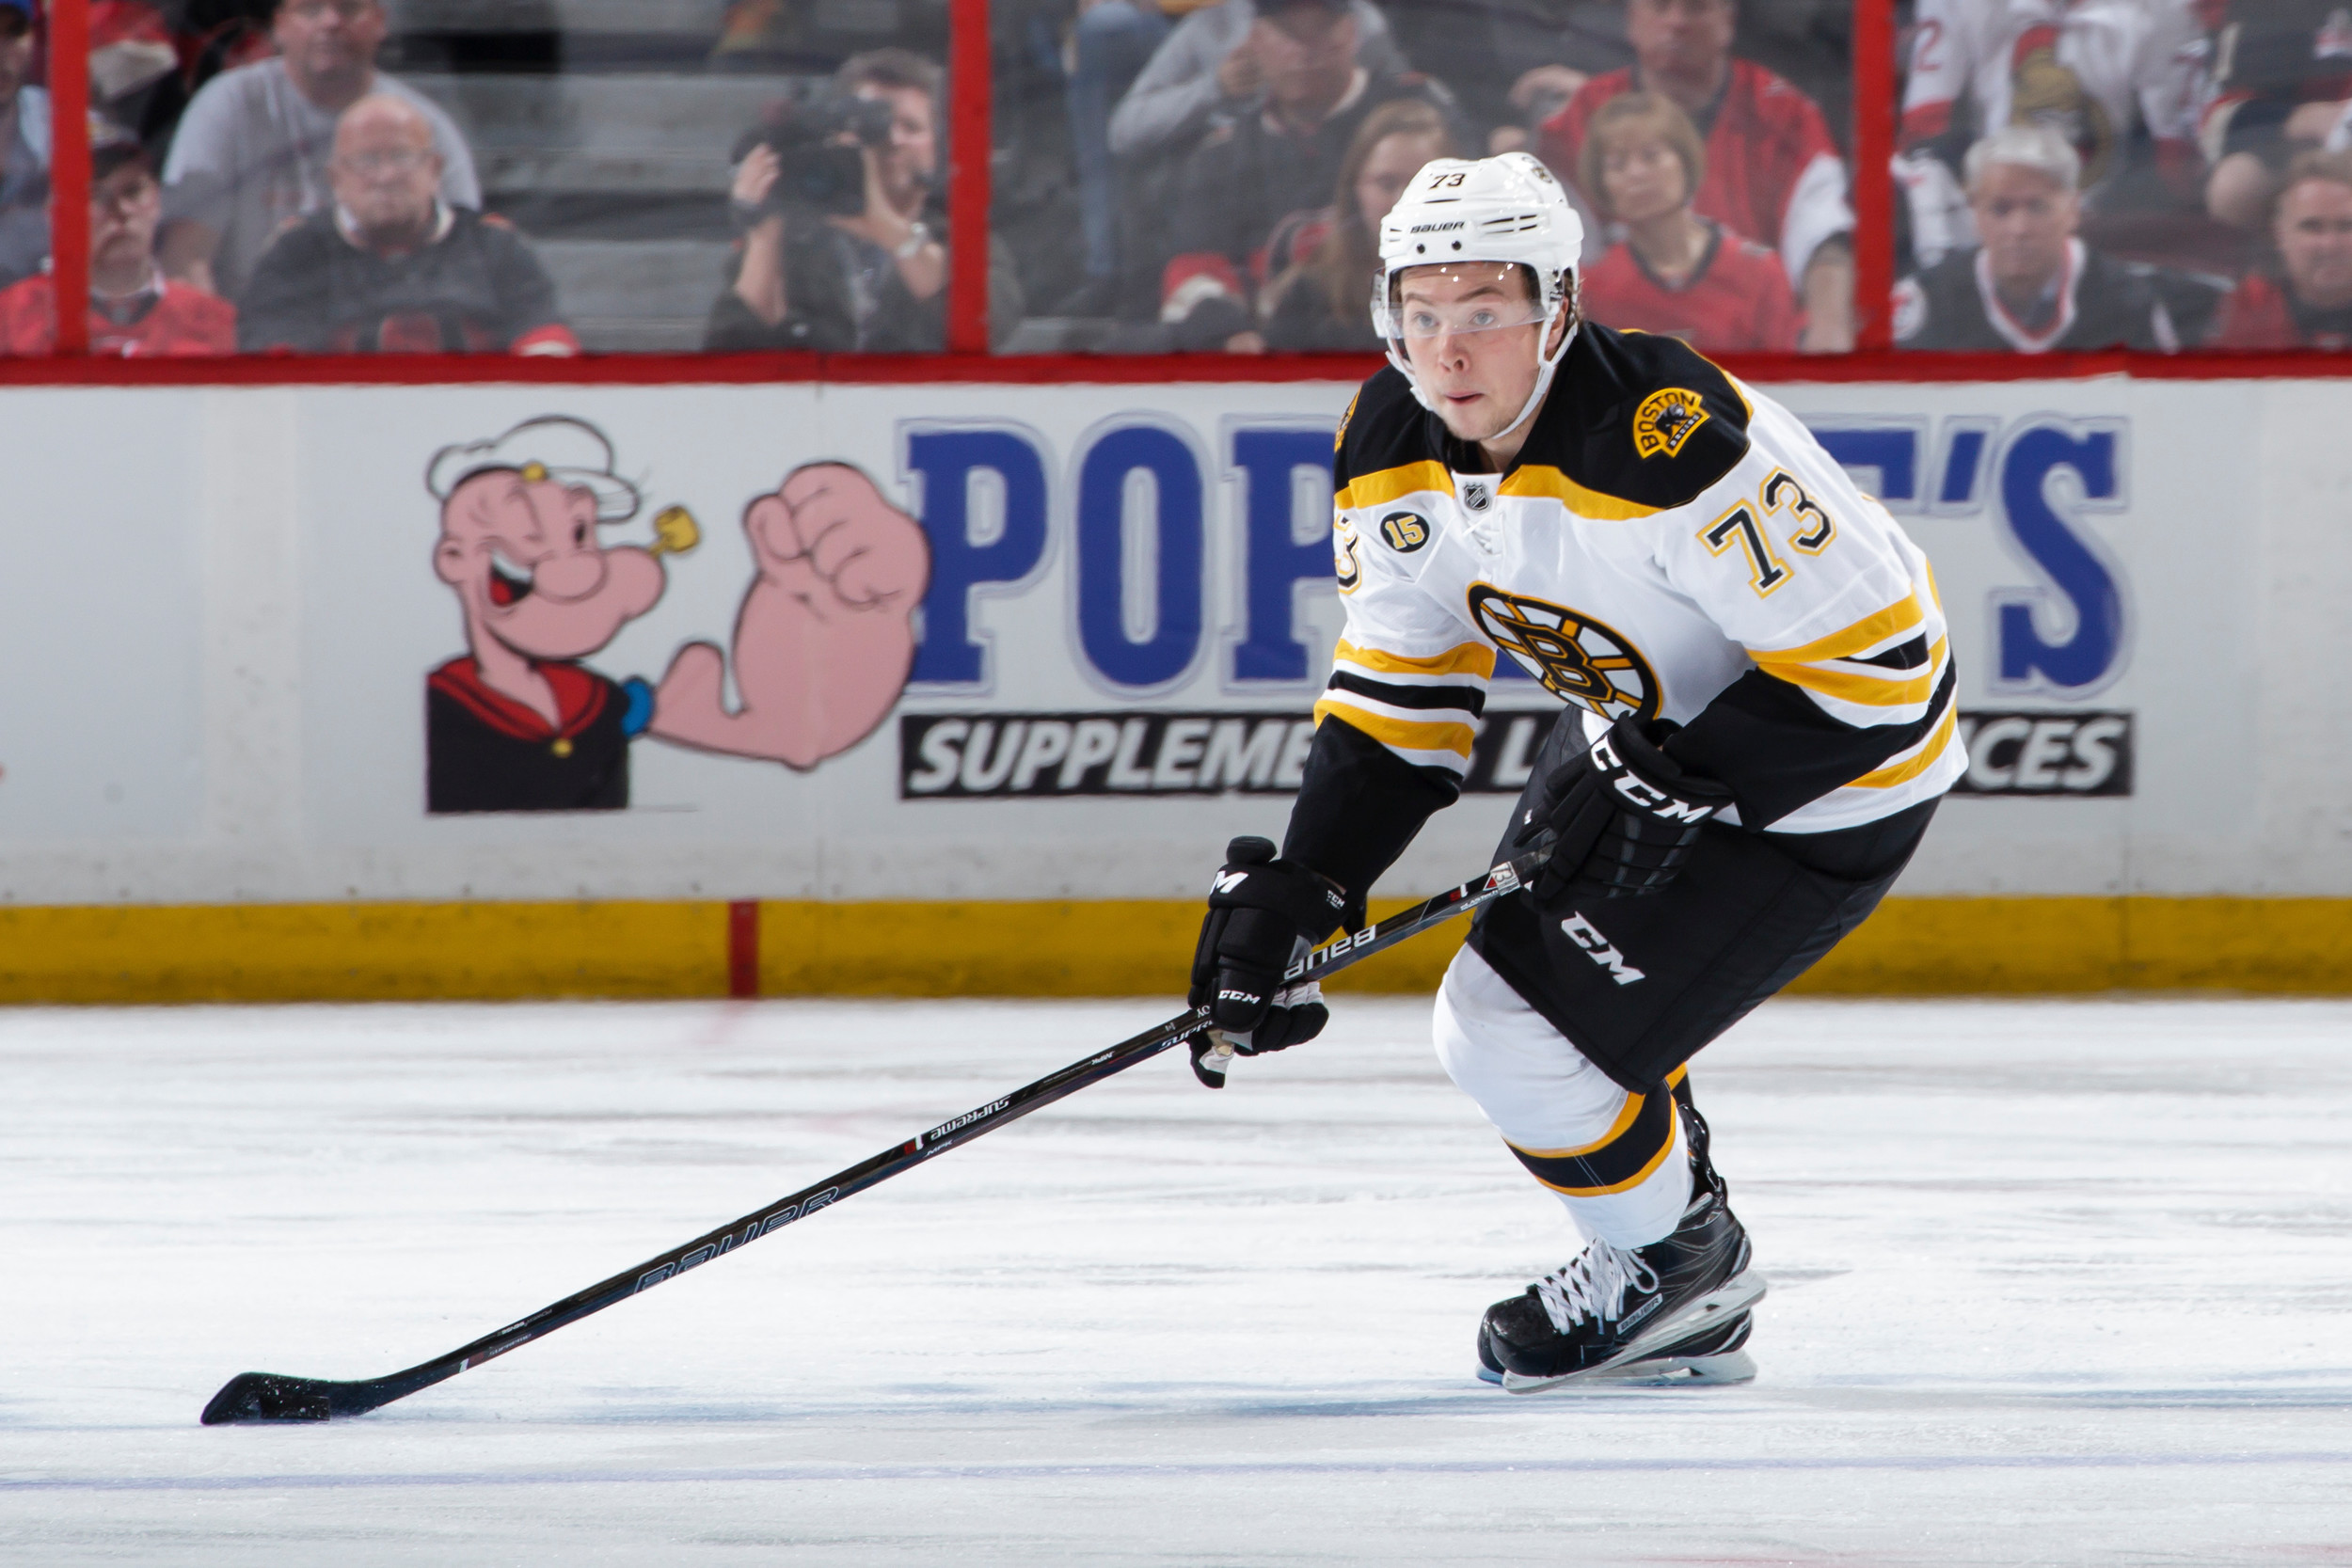 Long Beach native and Boston Bruins defenseman Charlie McAvoy skated against the Ottawa Senators in his National Hockey League debut on April 12 in Game 1 of the Stanley Cup playoffs. In Game 1, McAvoy logged the second-most time on ice behind Zdeno Chara, and recorded his first point in Game 3.